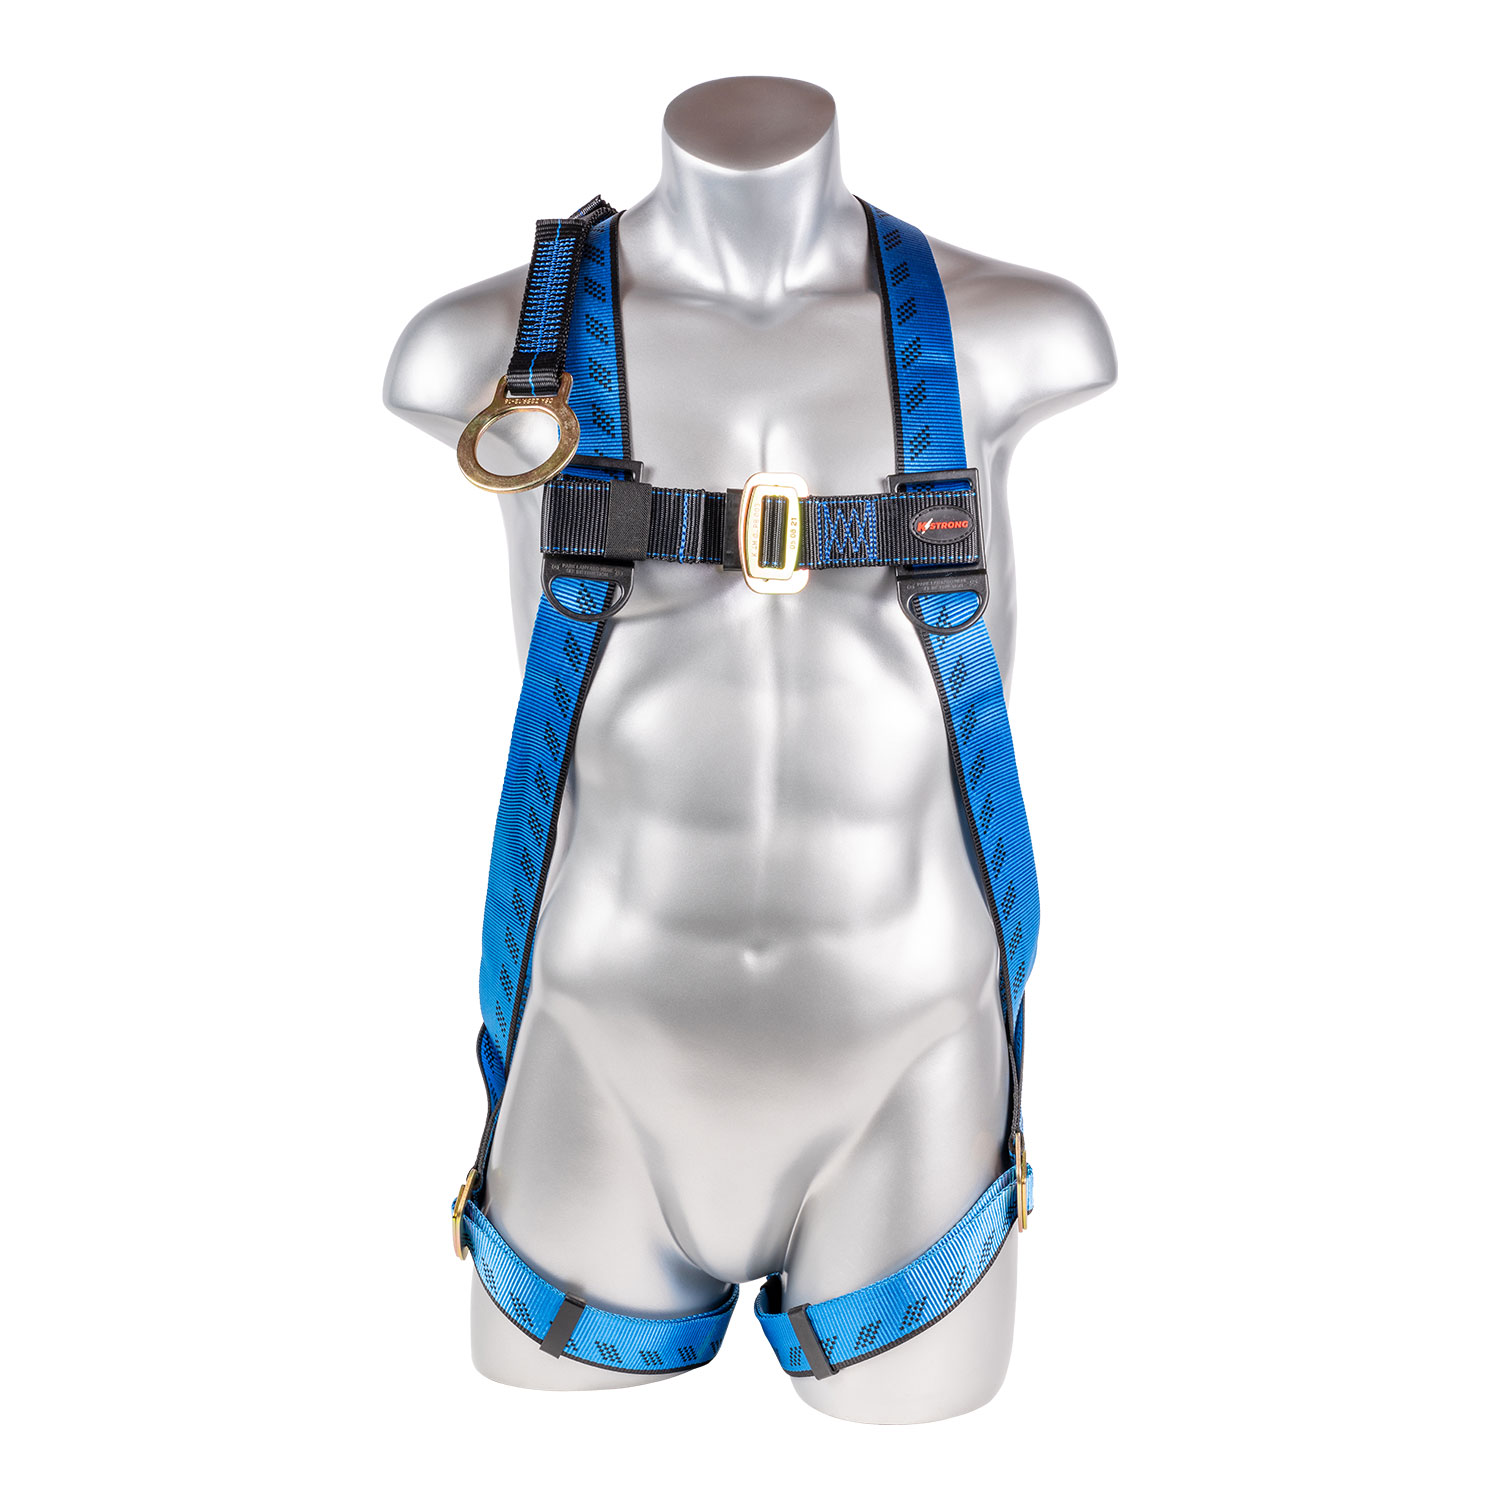 Harness FLY'IN 1 - 1 dorsal D-Ring and 1 chest attachment